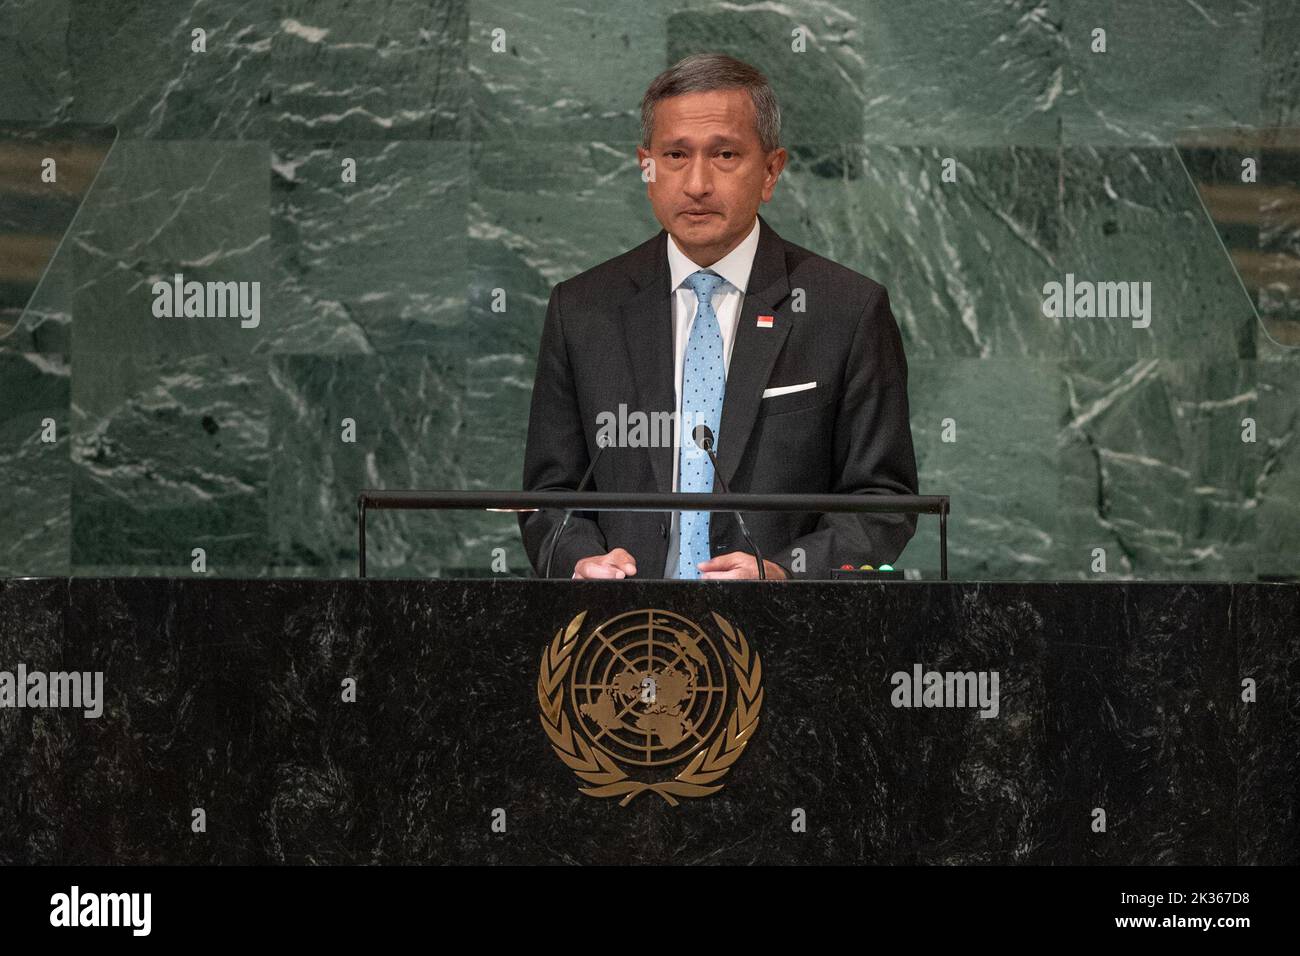 (220925) -- UNITED NATIONS, Sept. 25, 2022 (Xinhua) -- Singaporean Foreign Minister Vivian Balakrishnan speaks during the General Debate of the 77th session of the UN General Assembly at the UN headquarters in New York, on Sept. 24, 2022. TO GO WITH 'Singapore FM asks to uphold multilateral system amid unprecedented challenges' (Cia Pak/UN Photo/Handout via Xinhua) Stock Photo